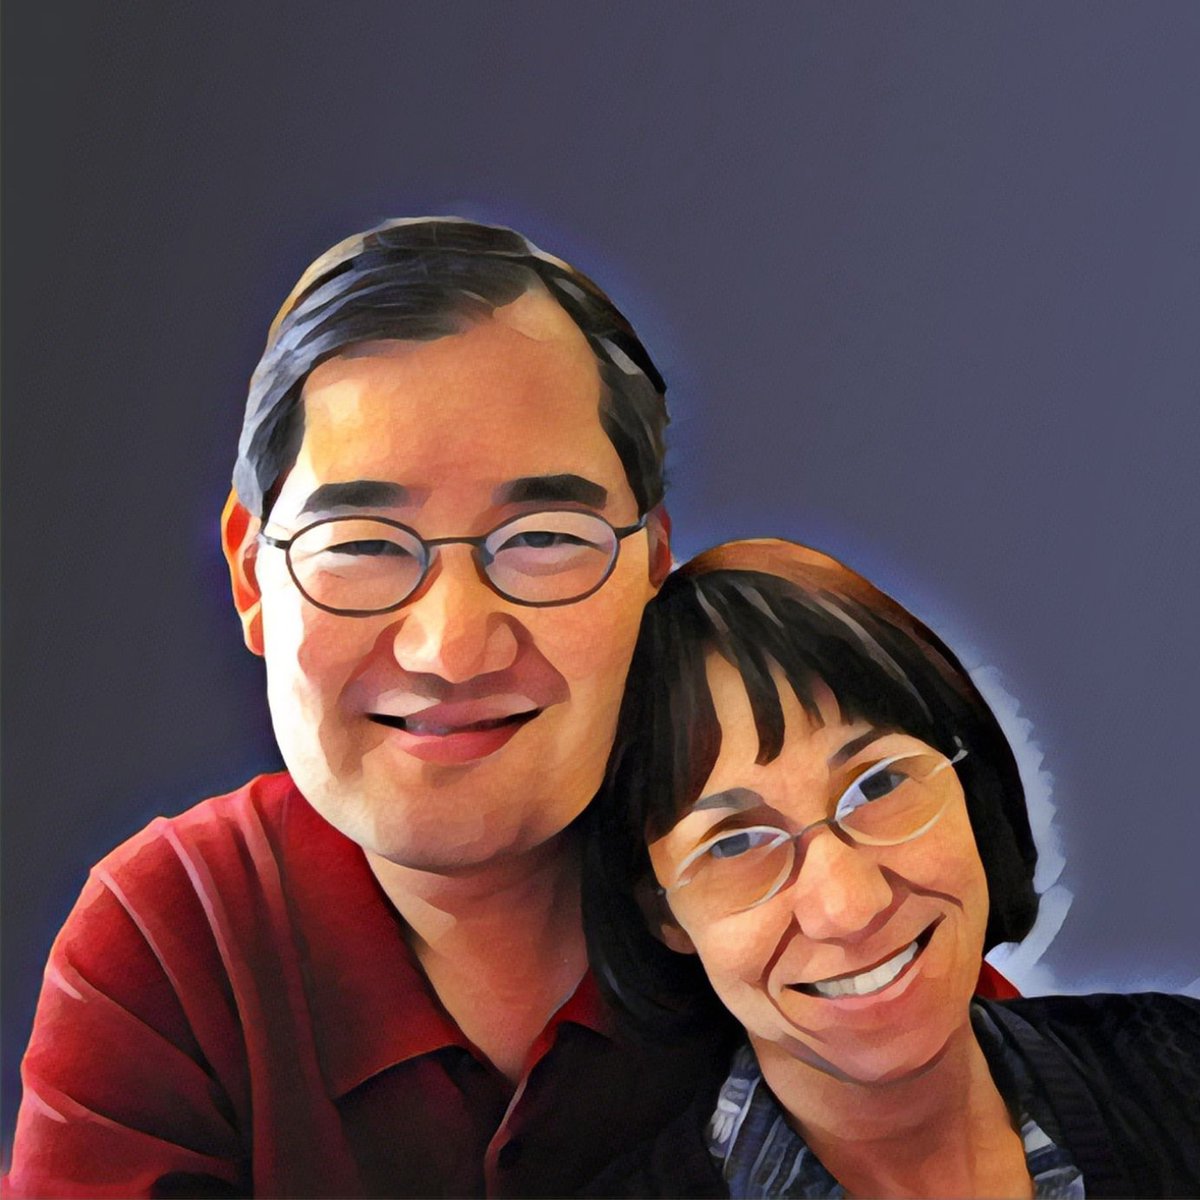 Legendary graphic designers Michael & Denise Okuda (@Michaelda & @deniseokuda) are sitting down in our new studio THURSDAY Sep 14 to record a conversation about their amazing careers! QUESTIONS? ASK HERE! (Also, send us photos of your favorite space shuttle mission patches!)